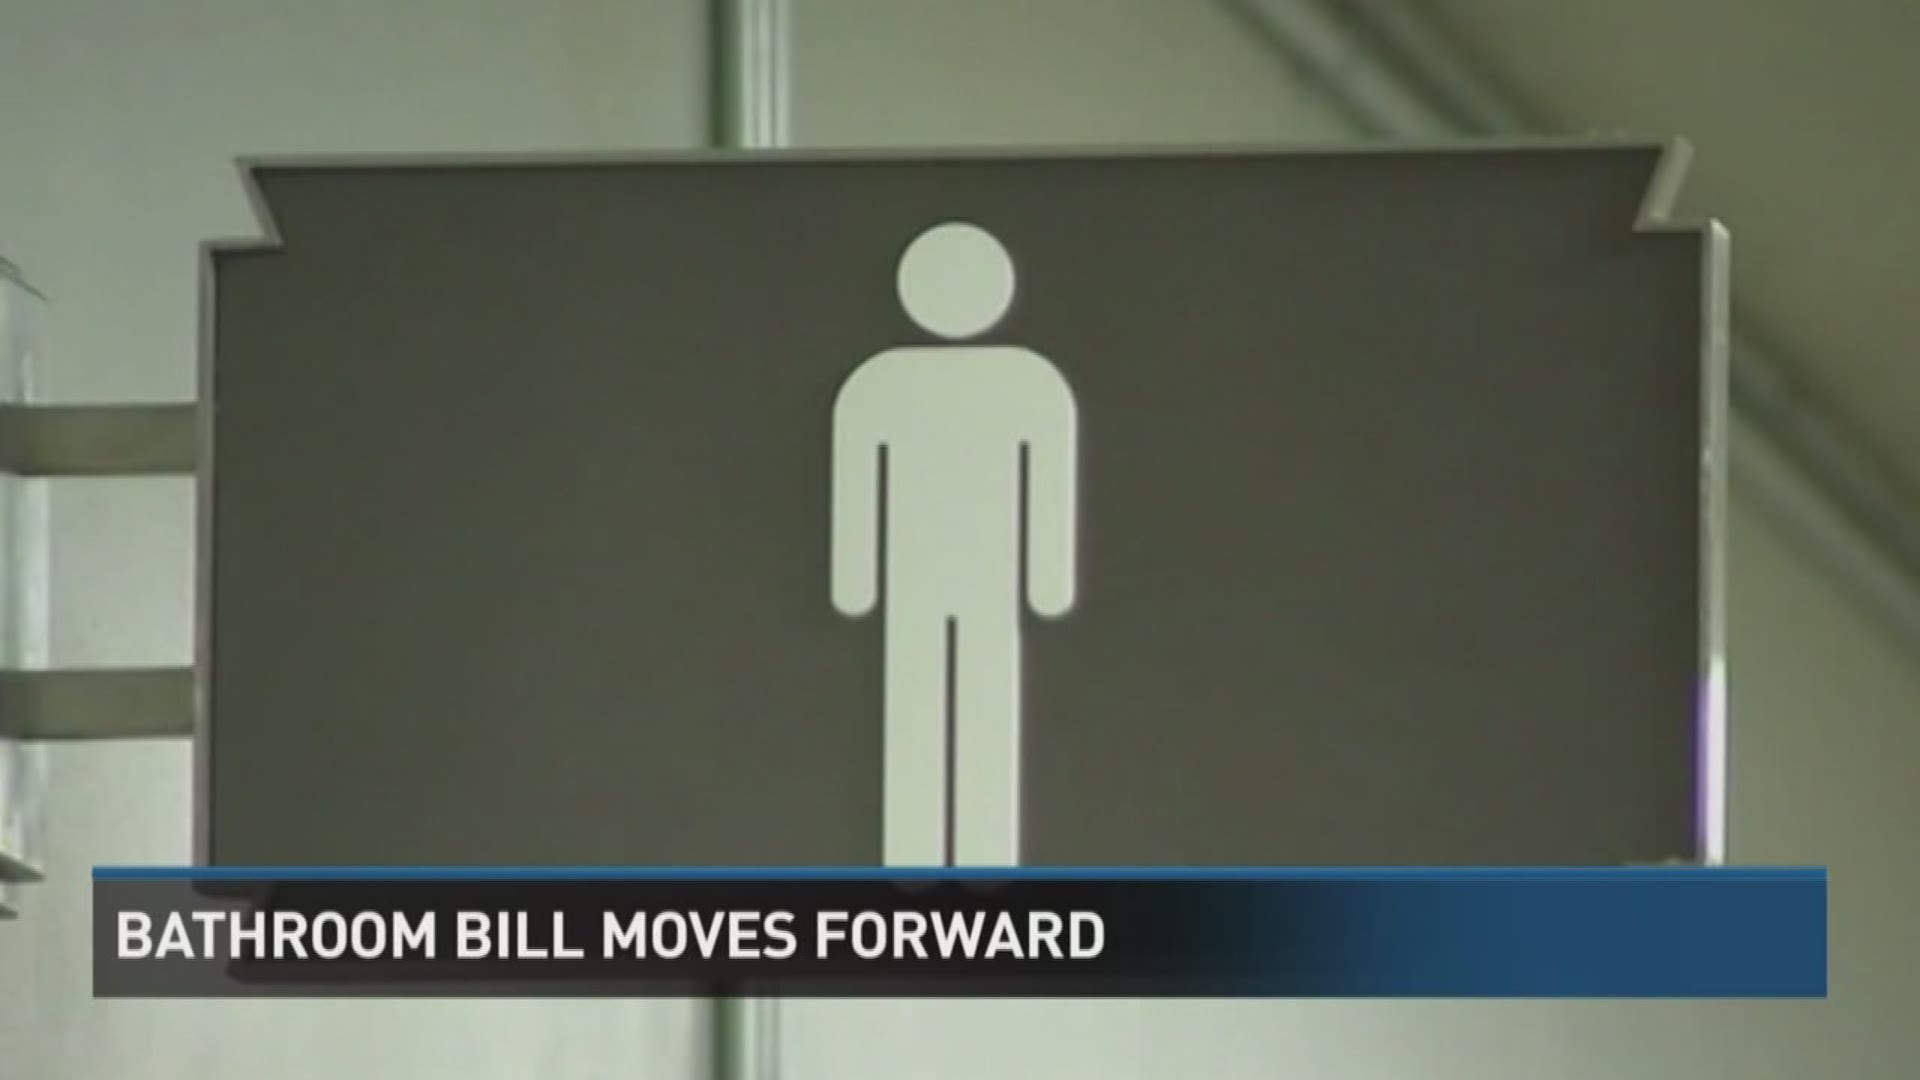 A revised version of the "bathroom bill" has passed in the Texas House.